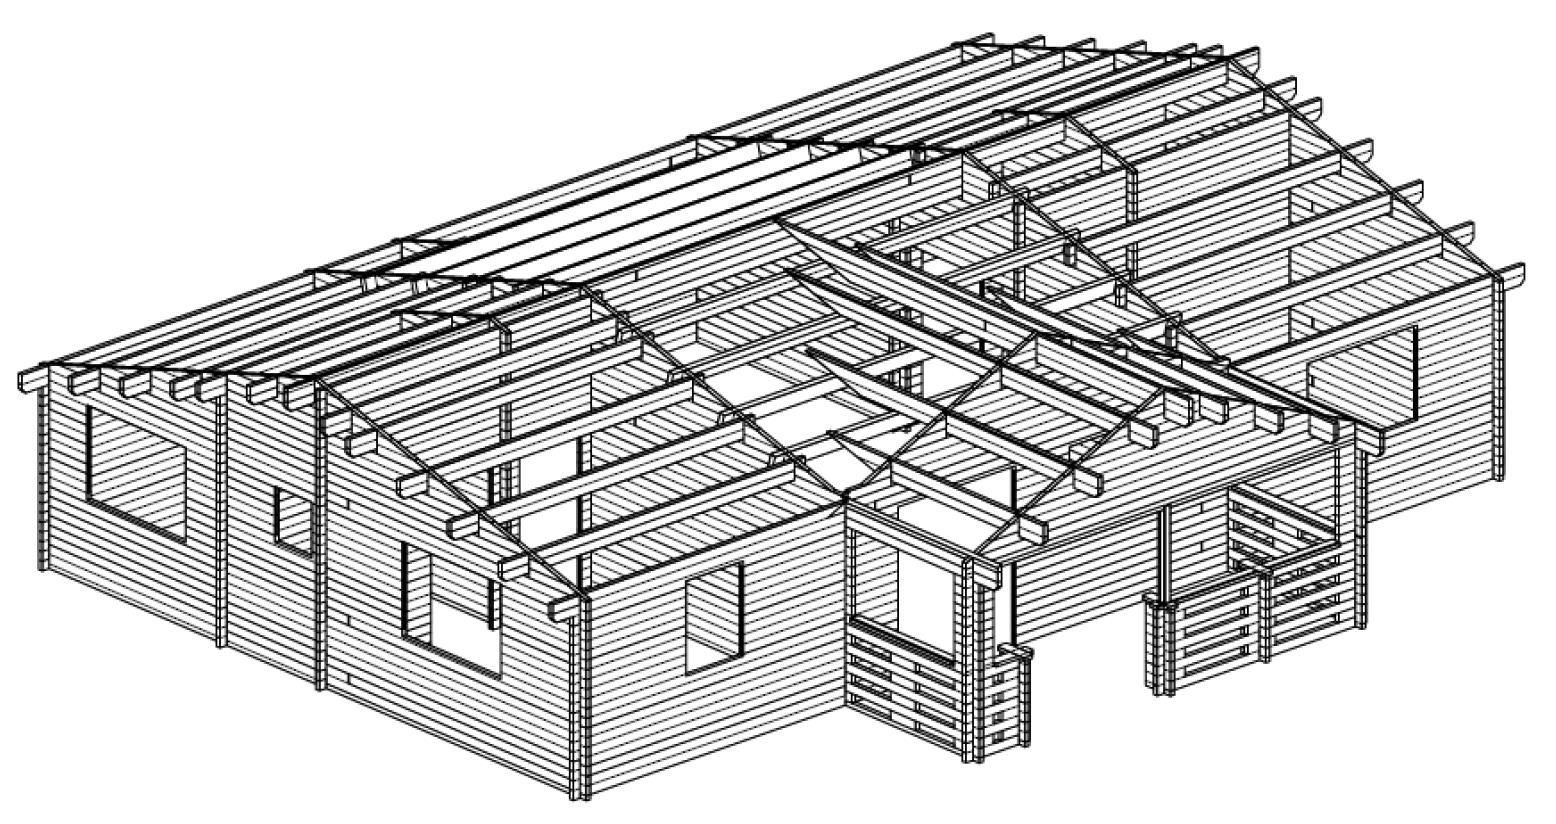 Wireframe. Technical drawing of a large house. Central section of the frame house design. Do it yourself building kits. EZ Log Structures.